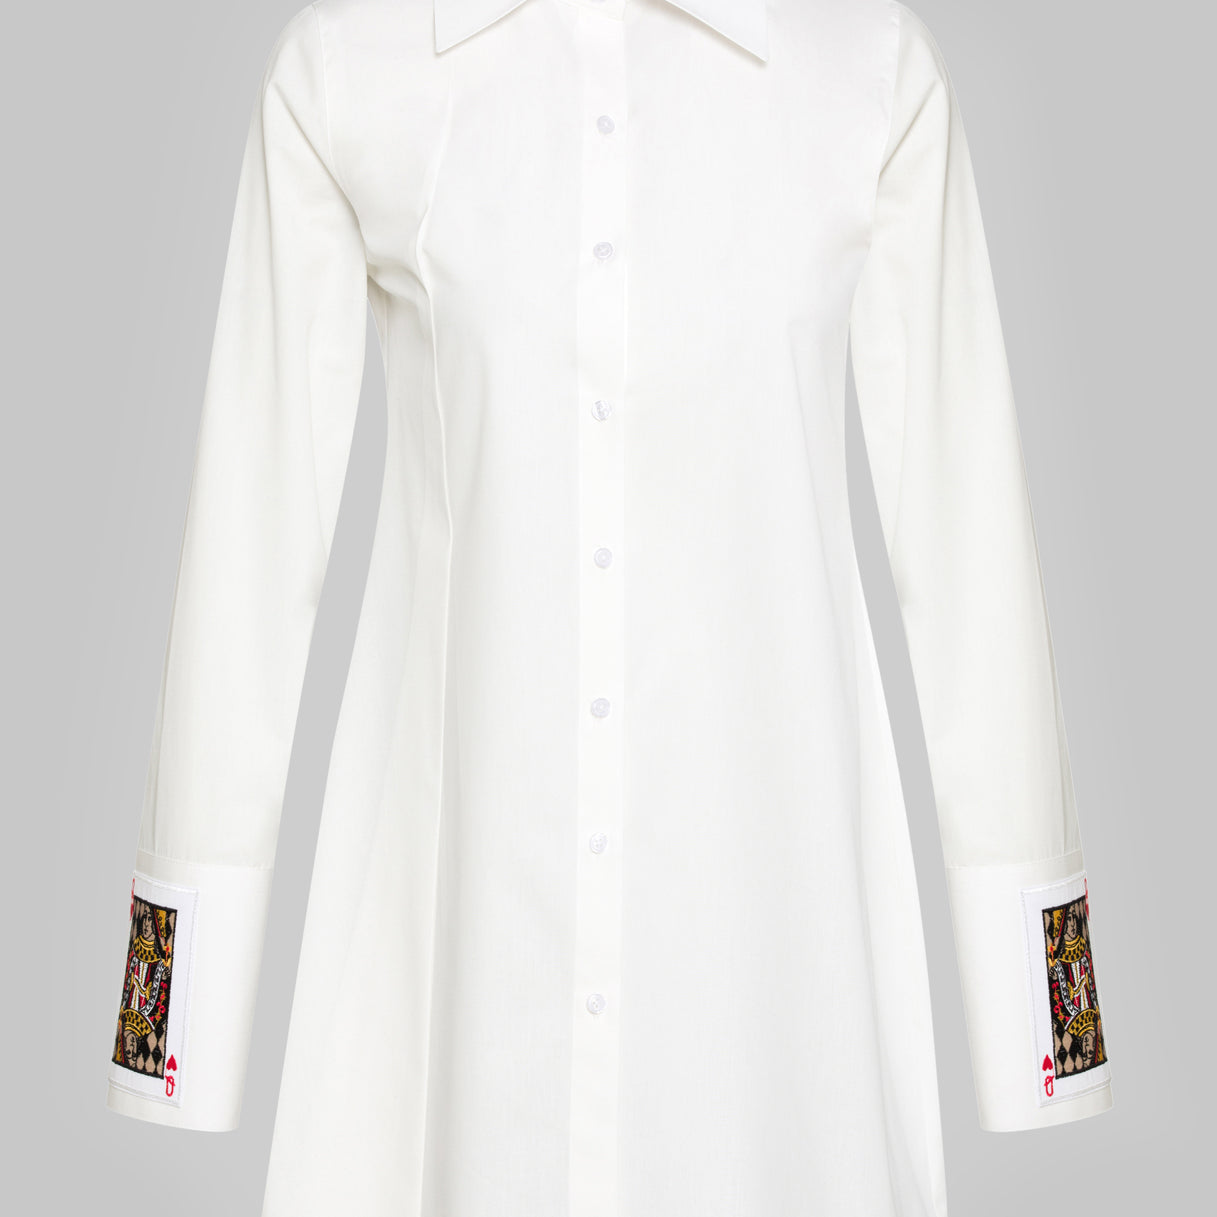 Crown Shirt İn White
